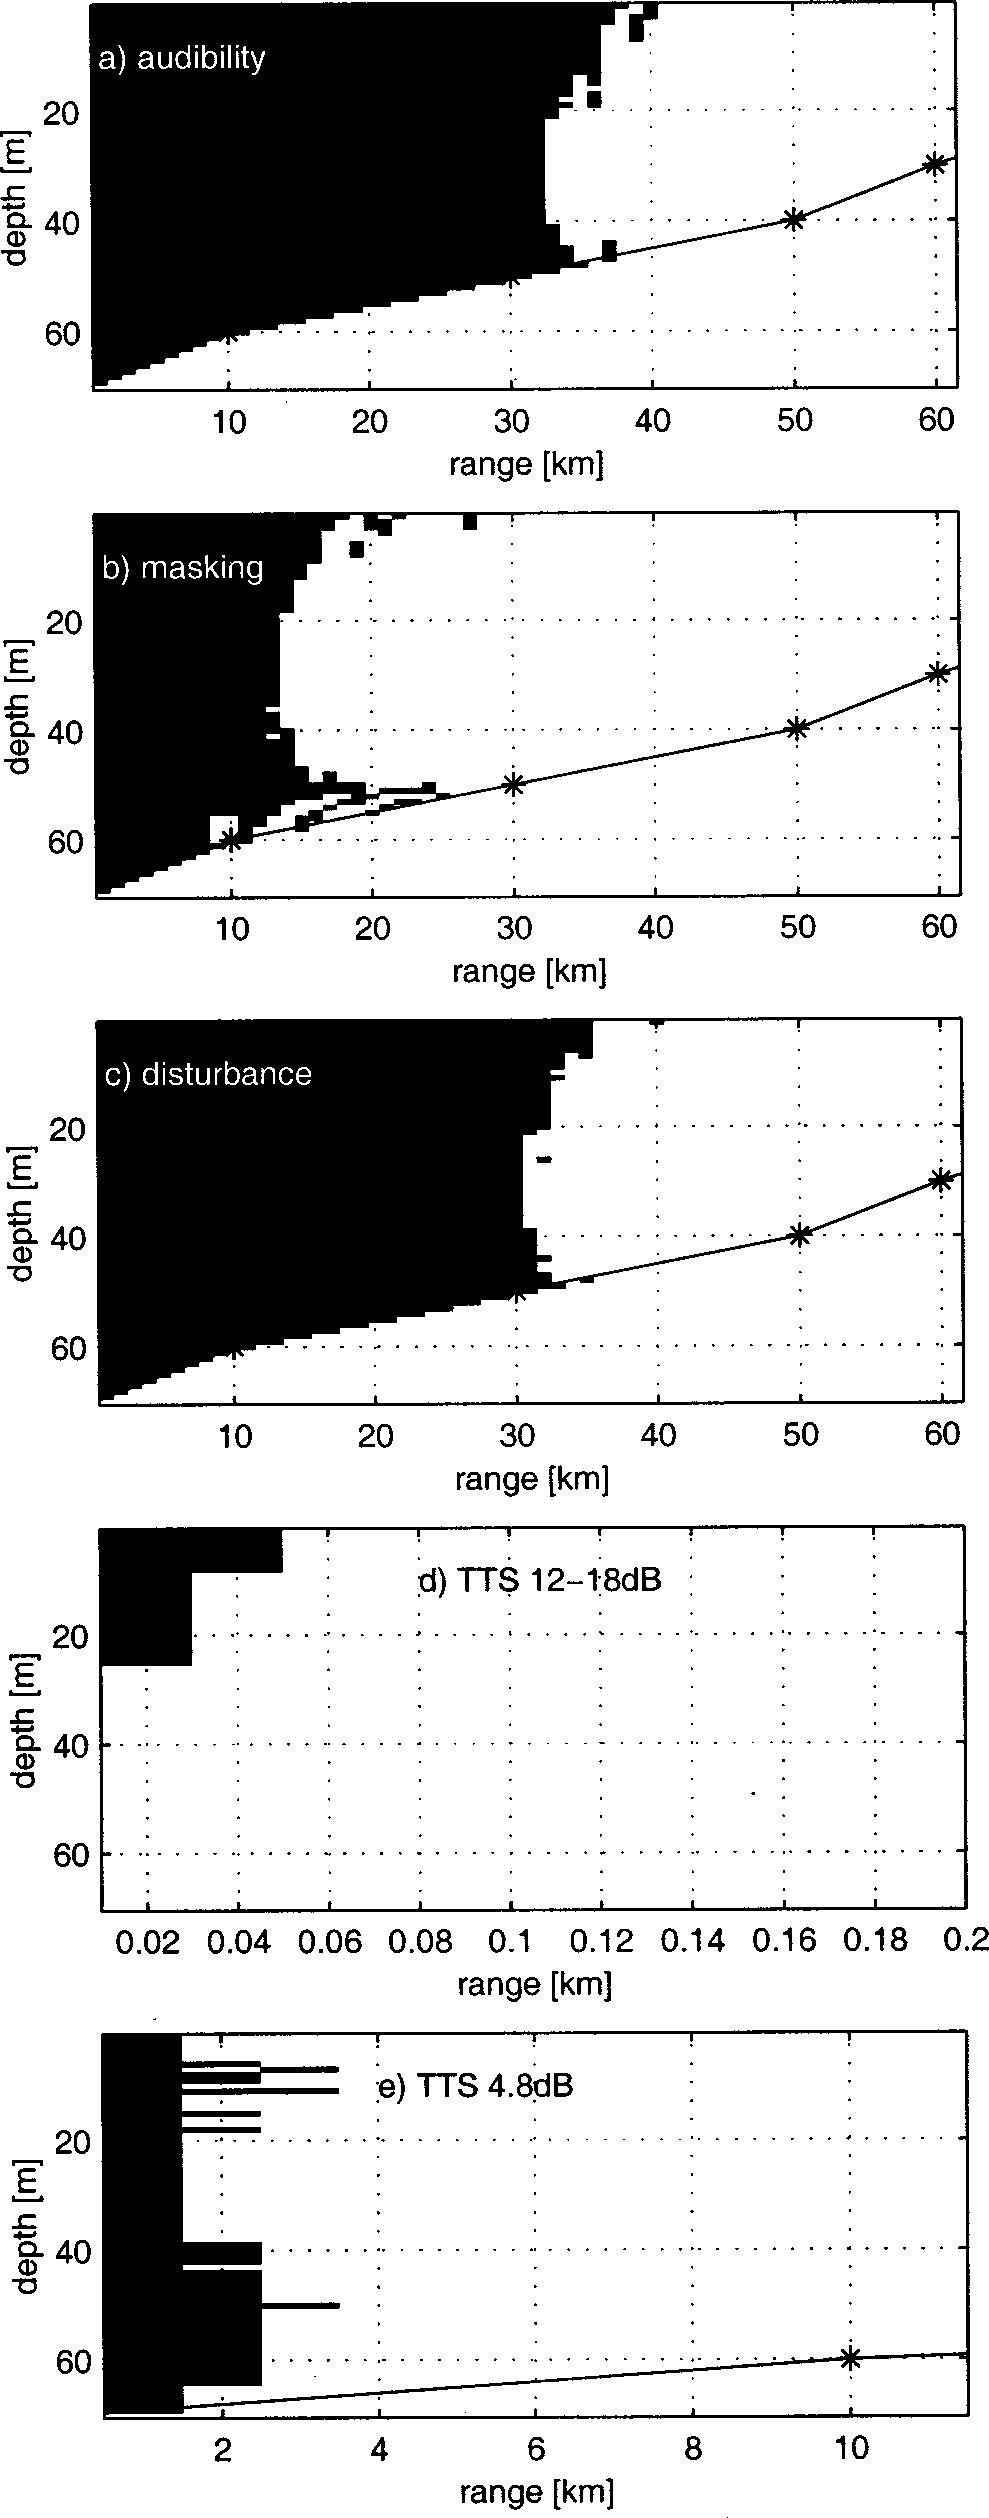 FIG. 10. Received 12th octave band levels of median bubbler noise at various ranges, taken at a depth of 20 m. FIG. 9. Zones of impact around median bubbler noise for T1.